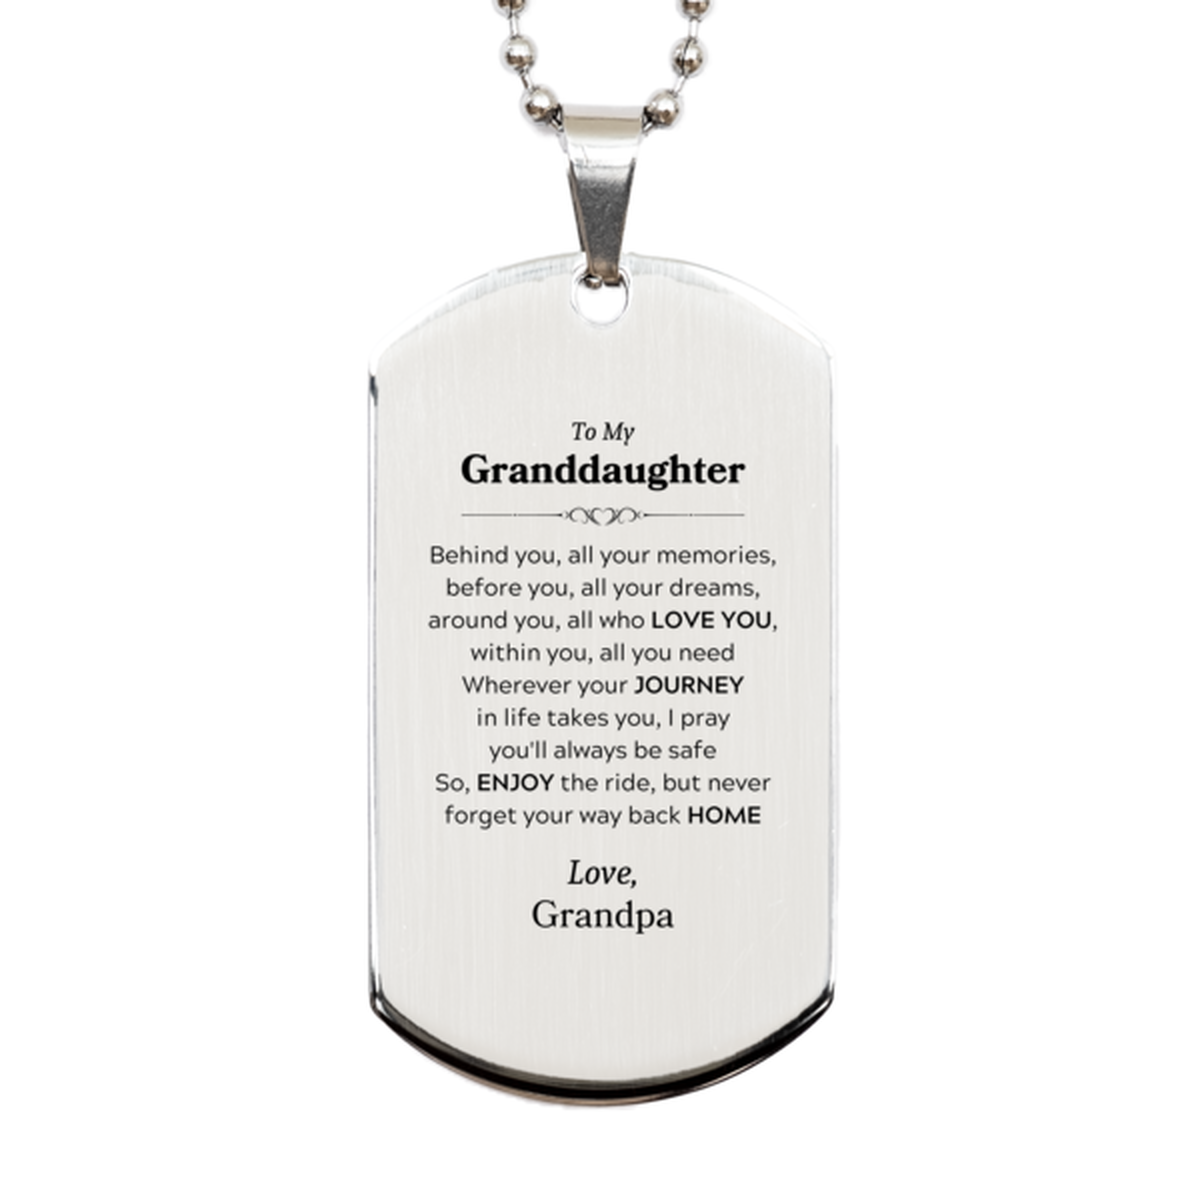 To My Granddaughter Graduation Gifts from Grandpa, Granddaughter Silver Dog Tag Christmas Birthday Gifts for Granddaughter Behind you, all your memories, before you, all your dreams. Love, Grandpa